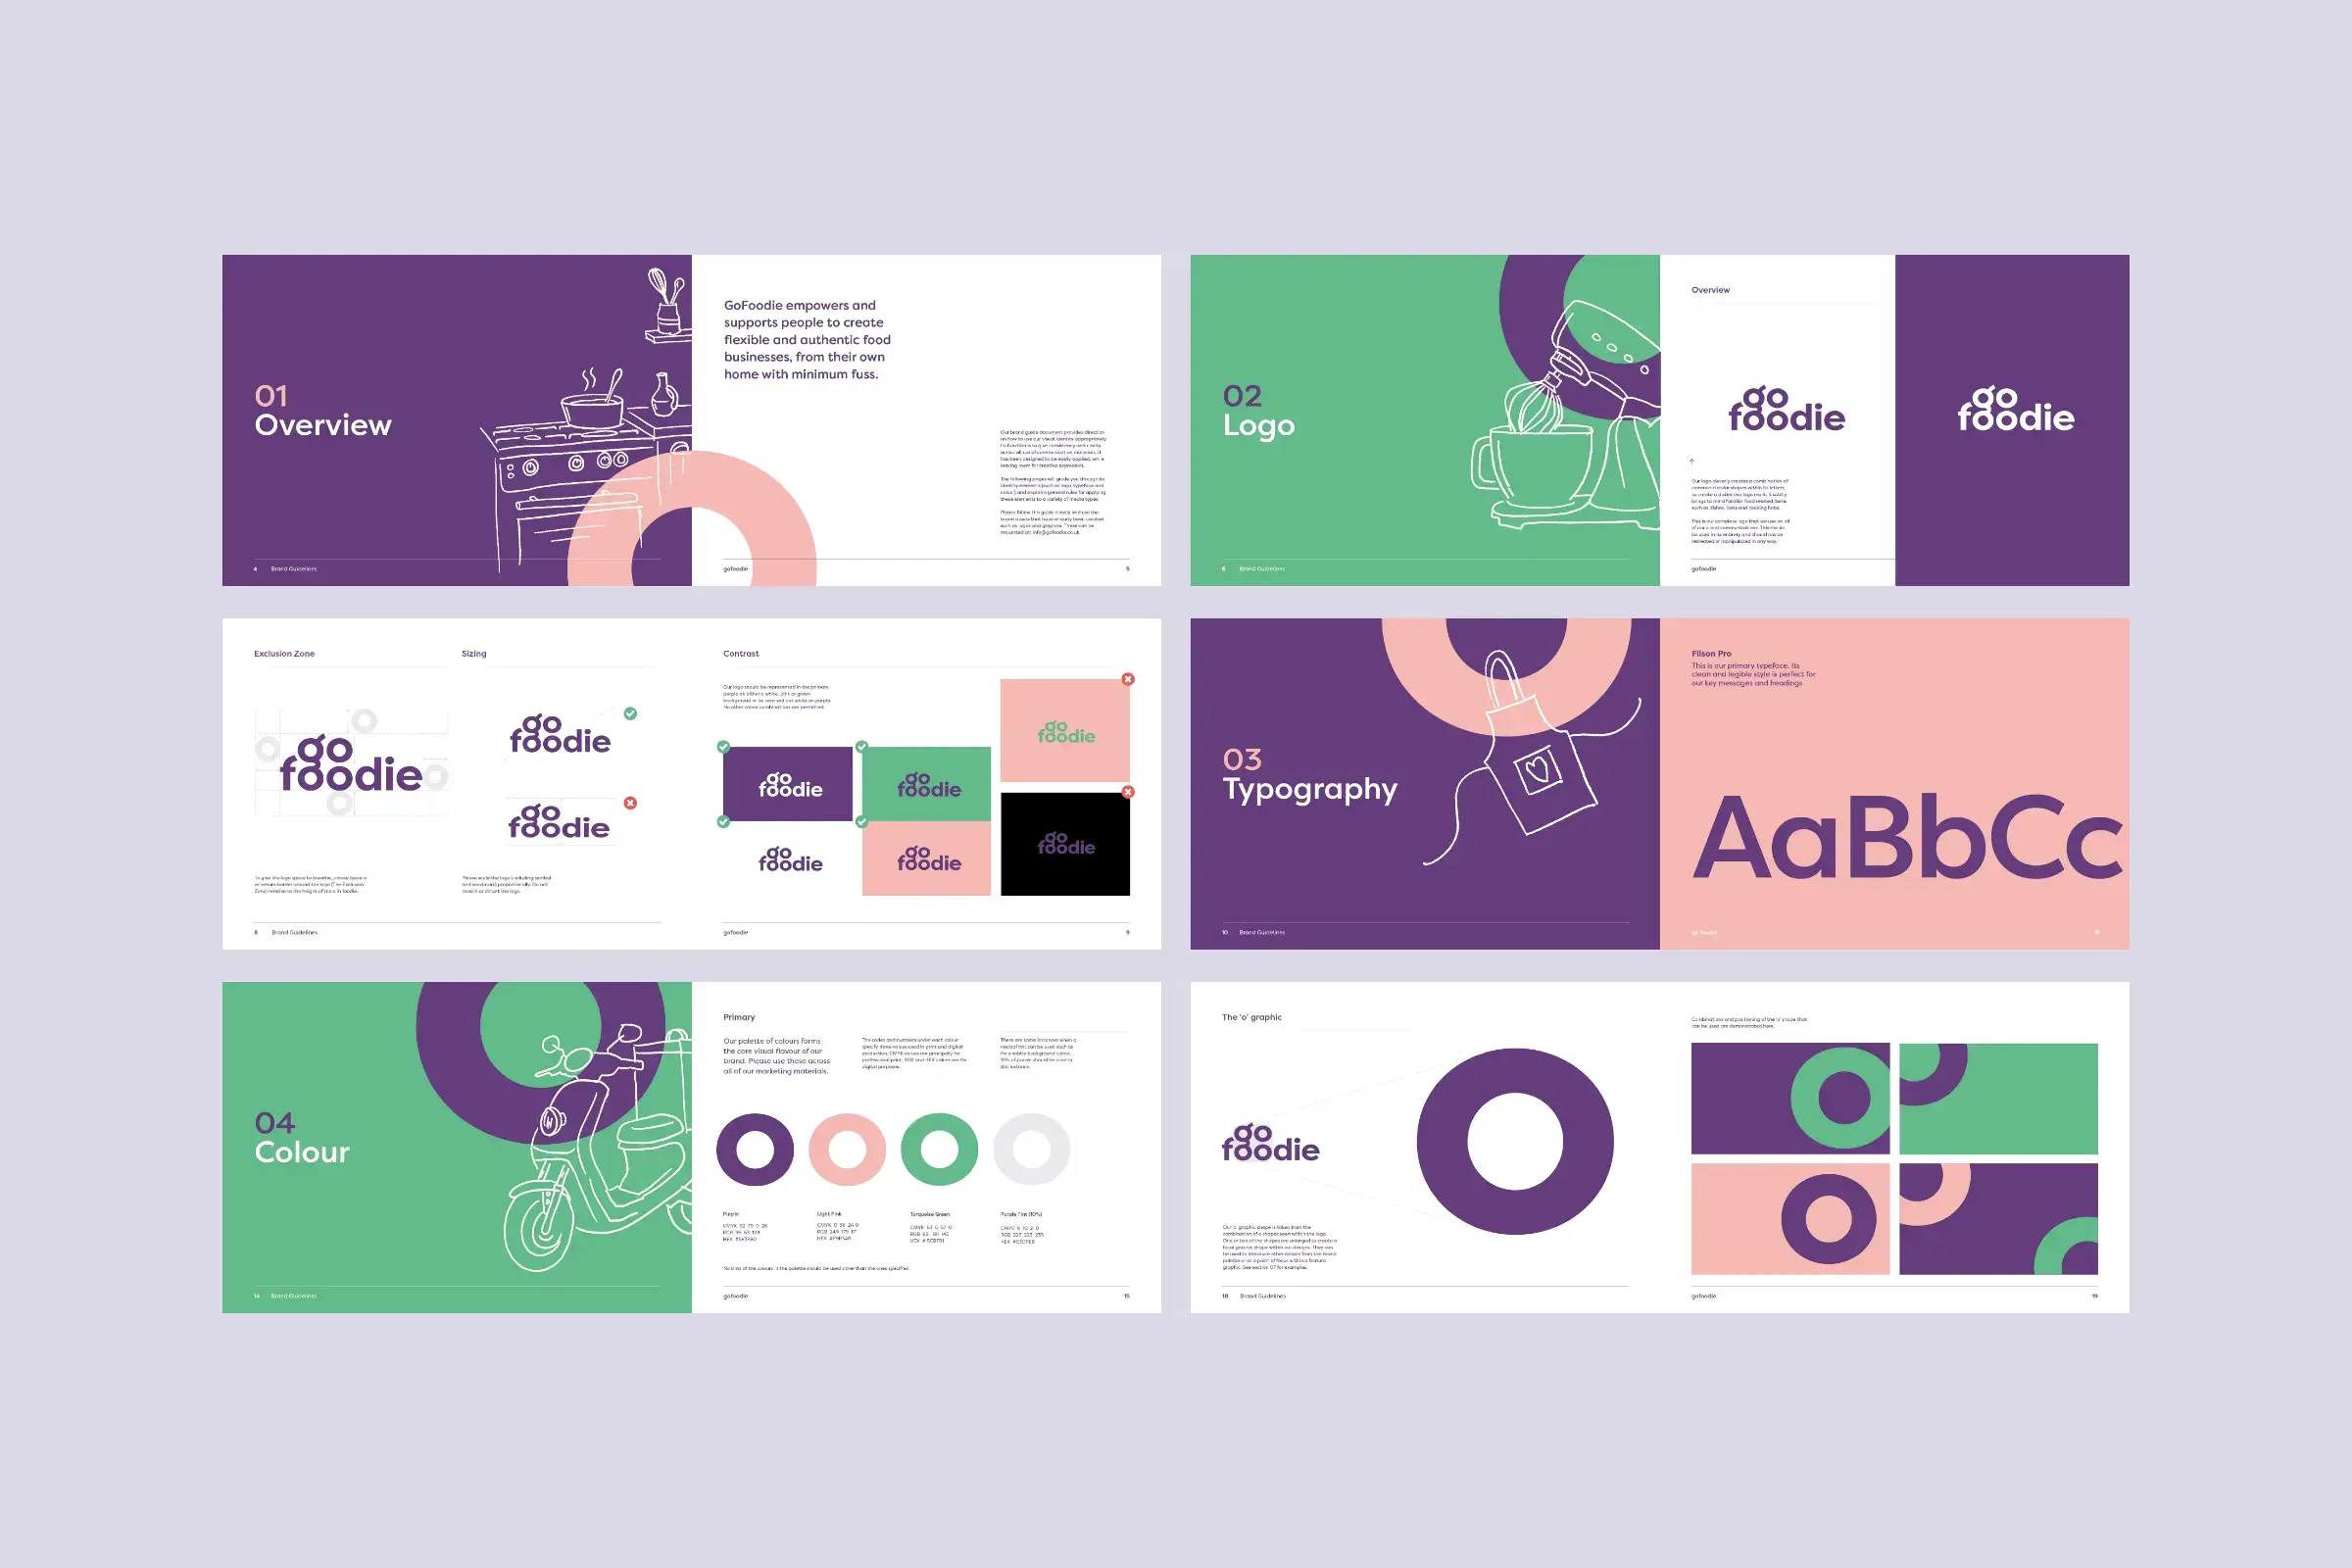 GoFoodie brand identity - brand guide document - visuals by Ten Fathoms